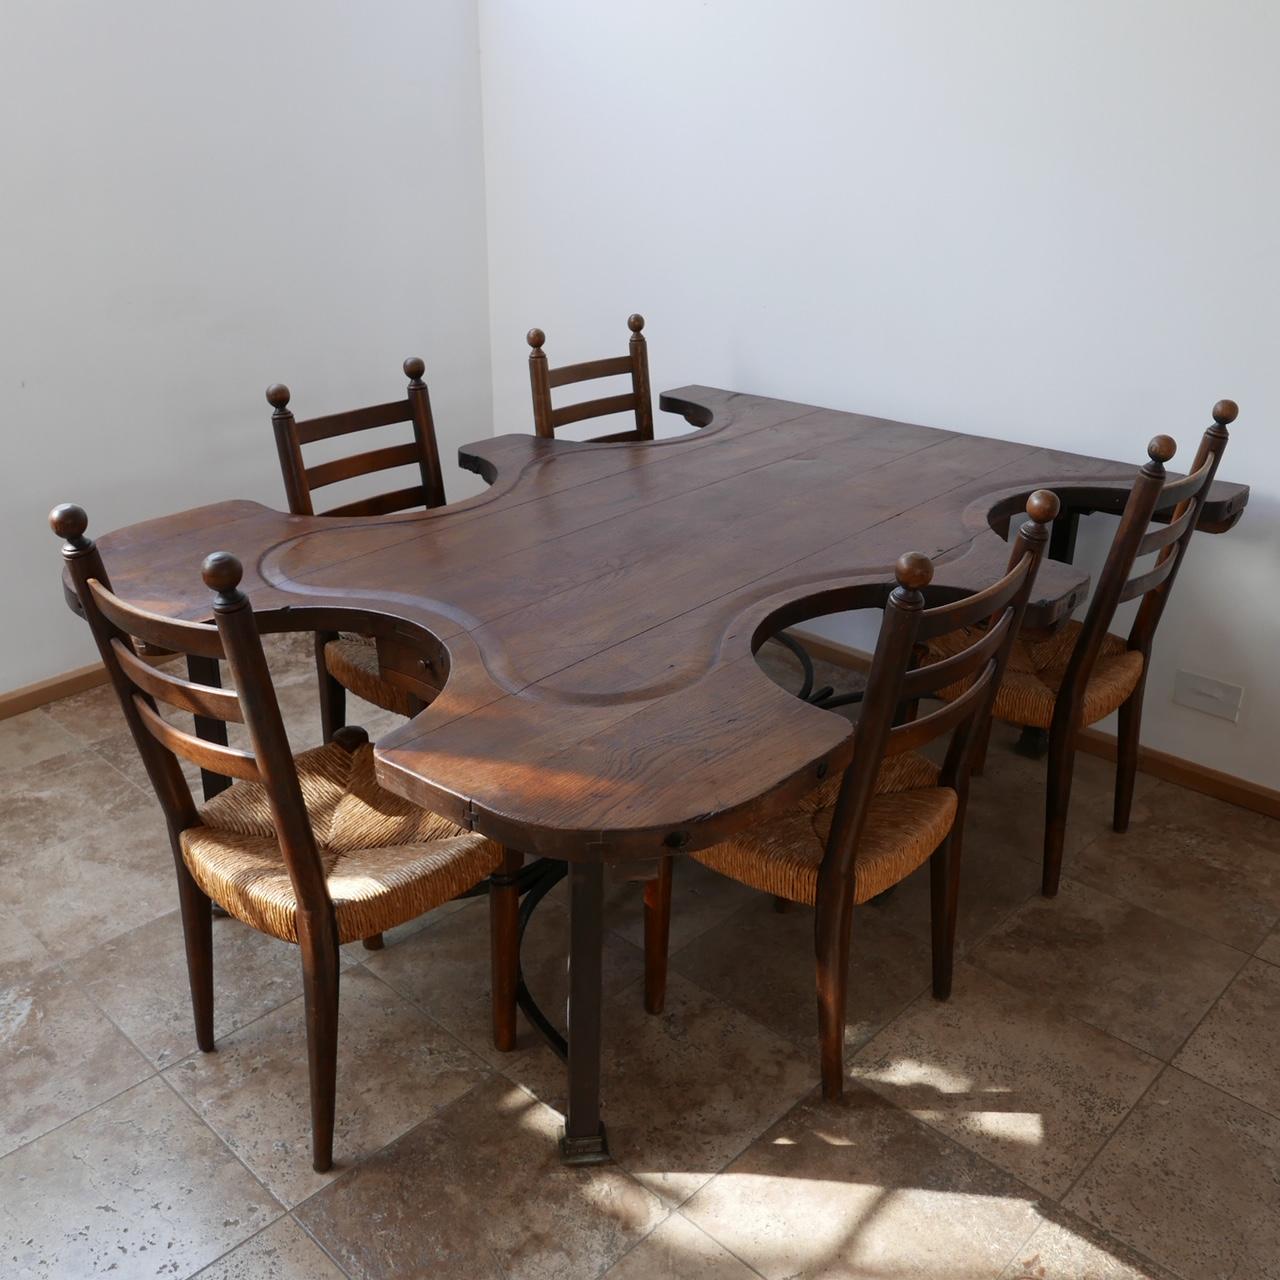 A rare immense quality antique table originally used for jewelry making.

Now the most amazing and unusual dining or work table.

On the original metal base, the old gas taps used for heating equipment remains under the base providing a great